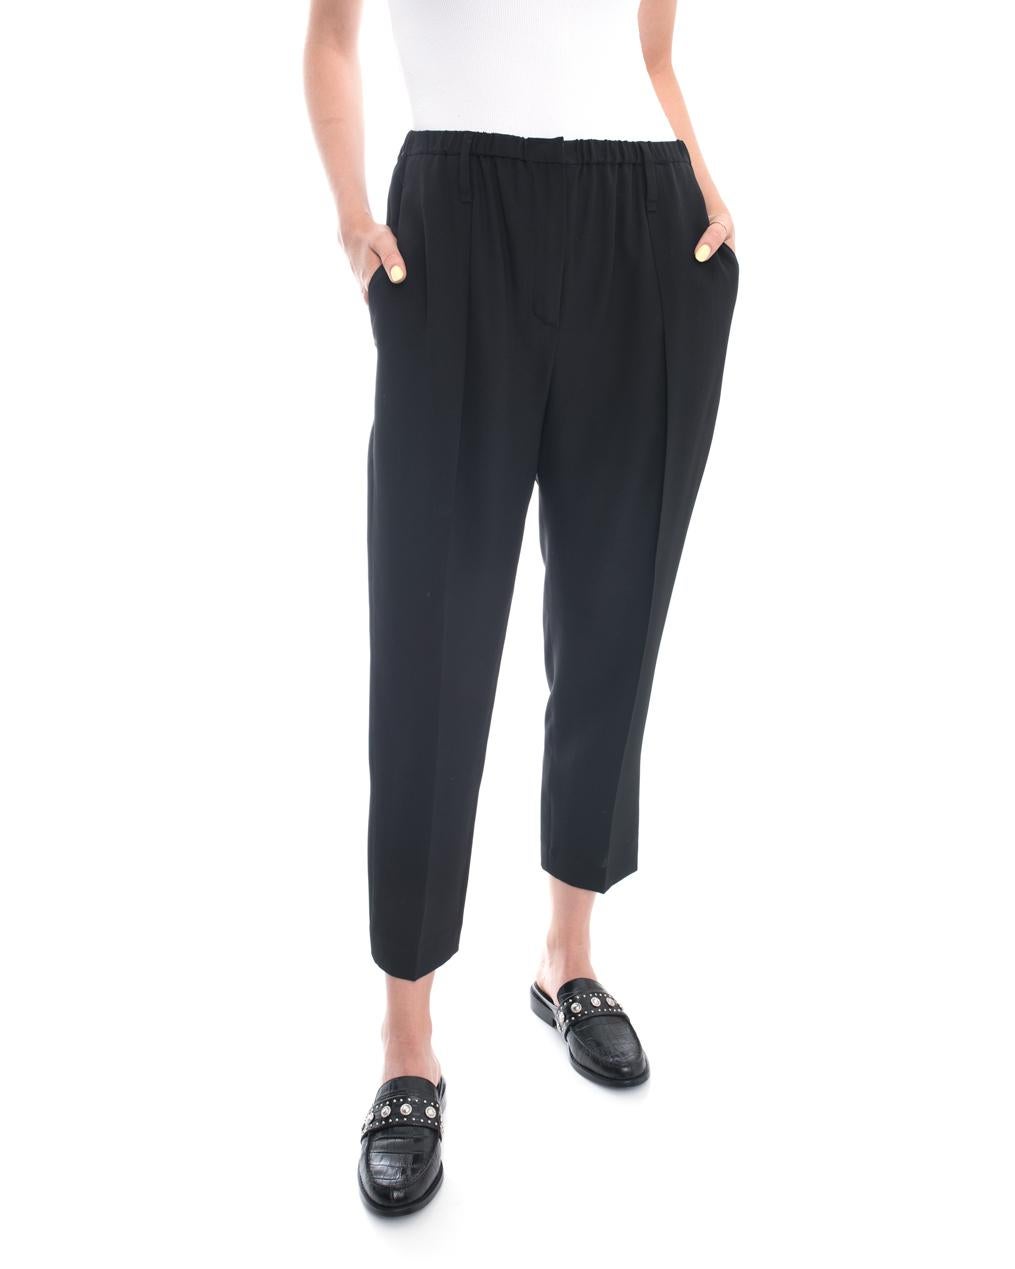 Brunello Cucinelli black silk Pleated Trousers. Elastic waist, side hip pockets, tapered cropped design, pleated at waist.  Marked size IT42 (USA 6).  Measures 28-30” elastic waist, 41” hip designed to be worn by about 37” hip for ease of movement,